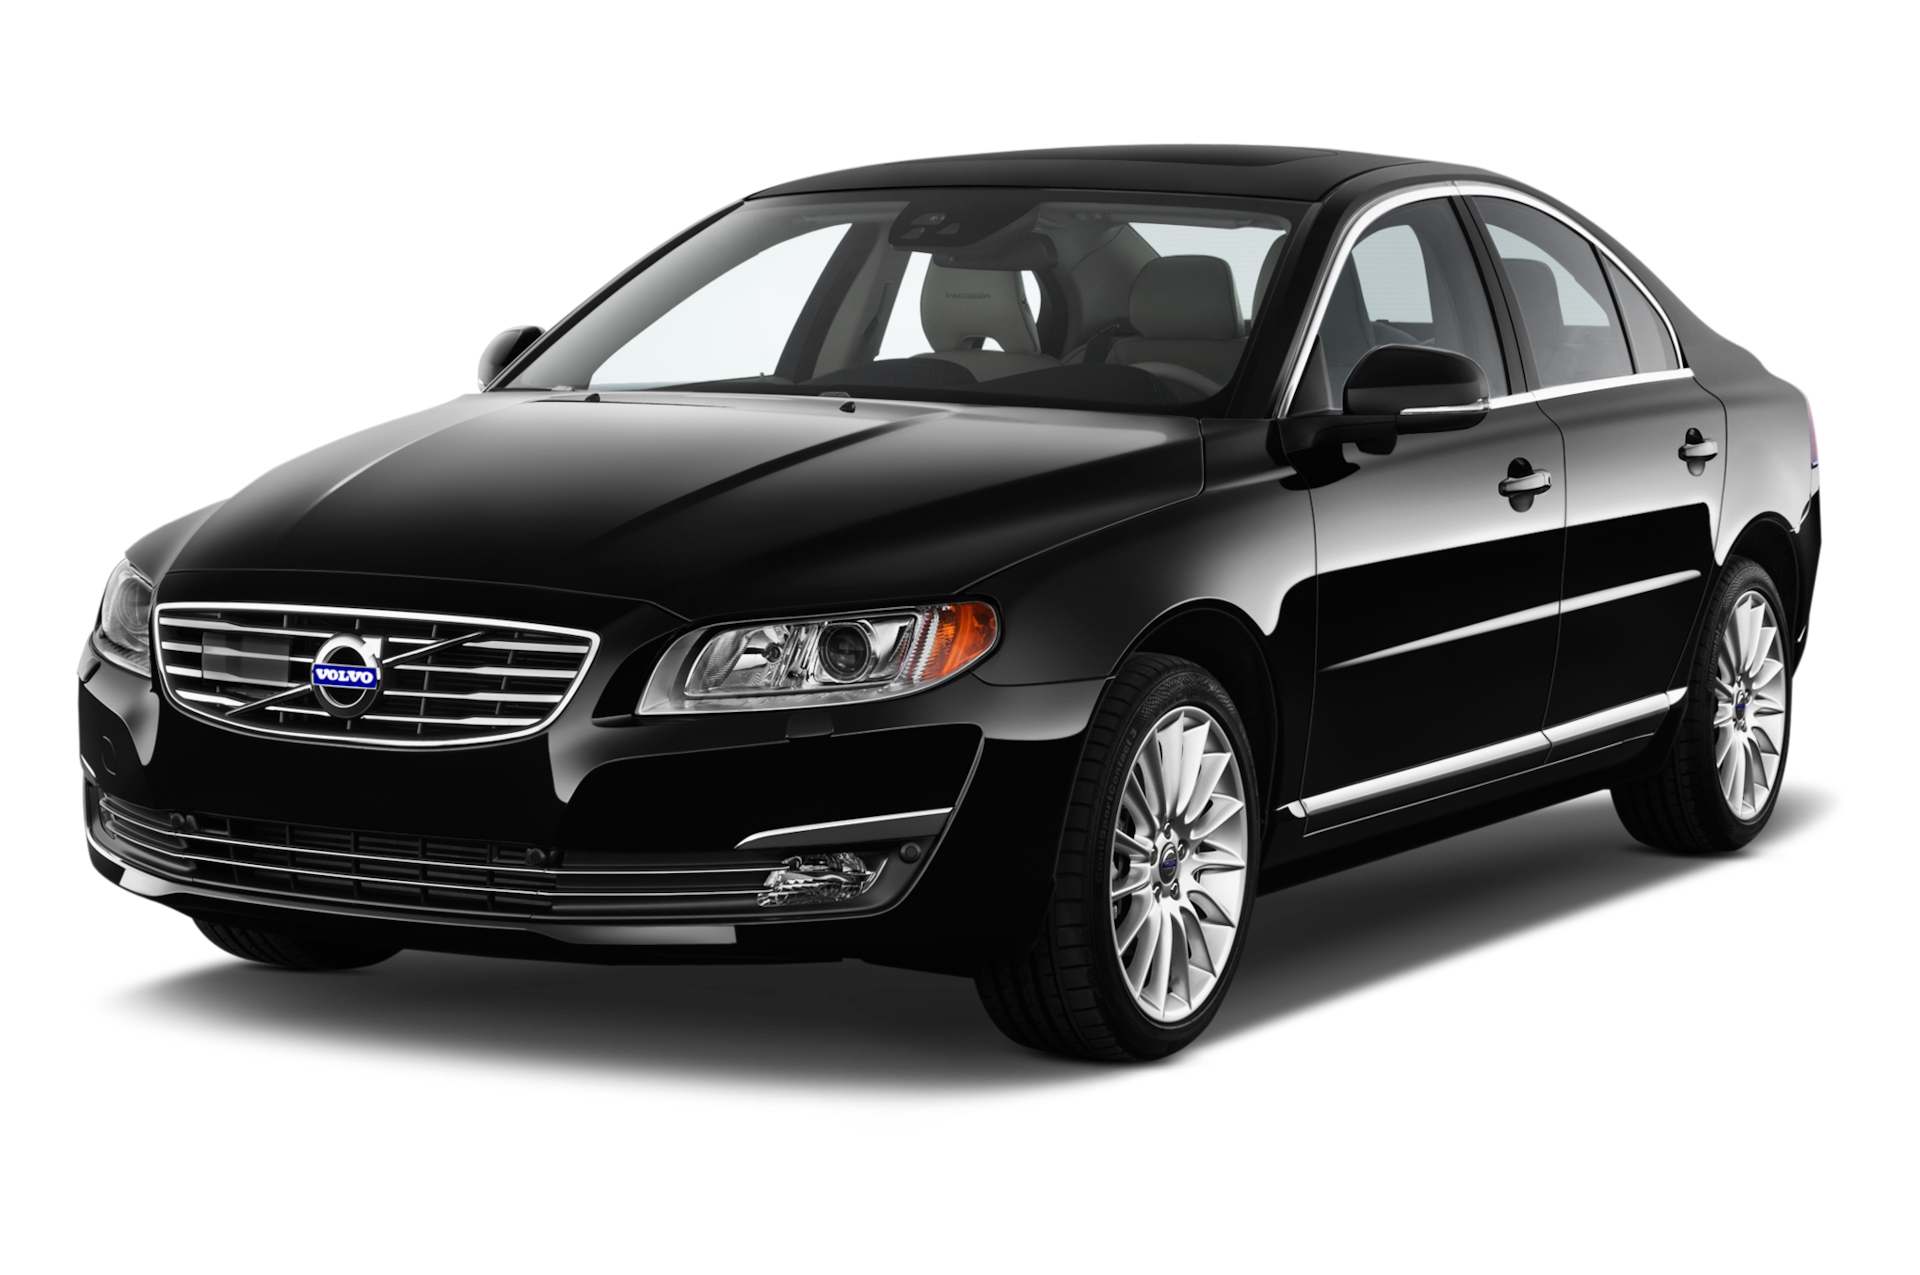 2014 Volvo S80 Prices, Reviews, and Photos - MotorTrend